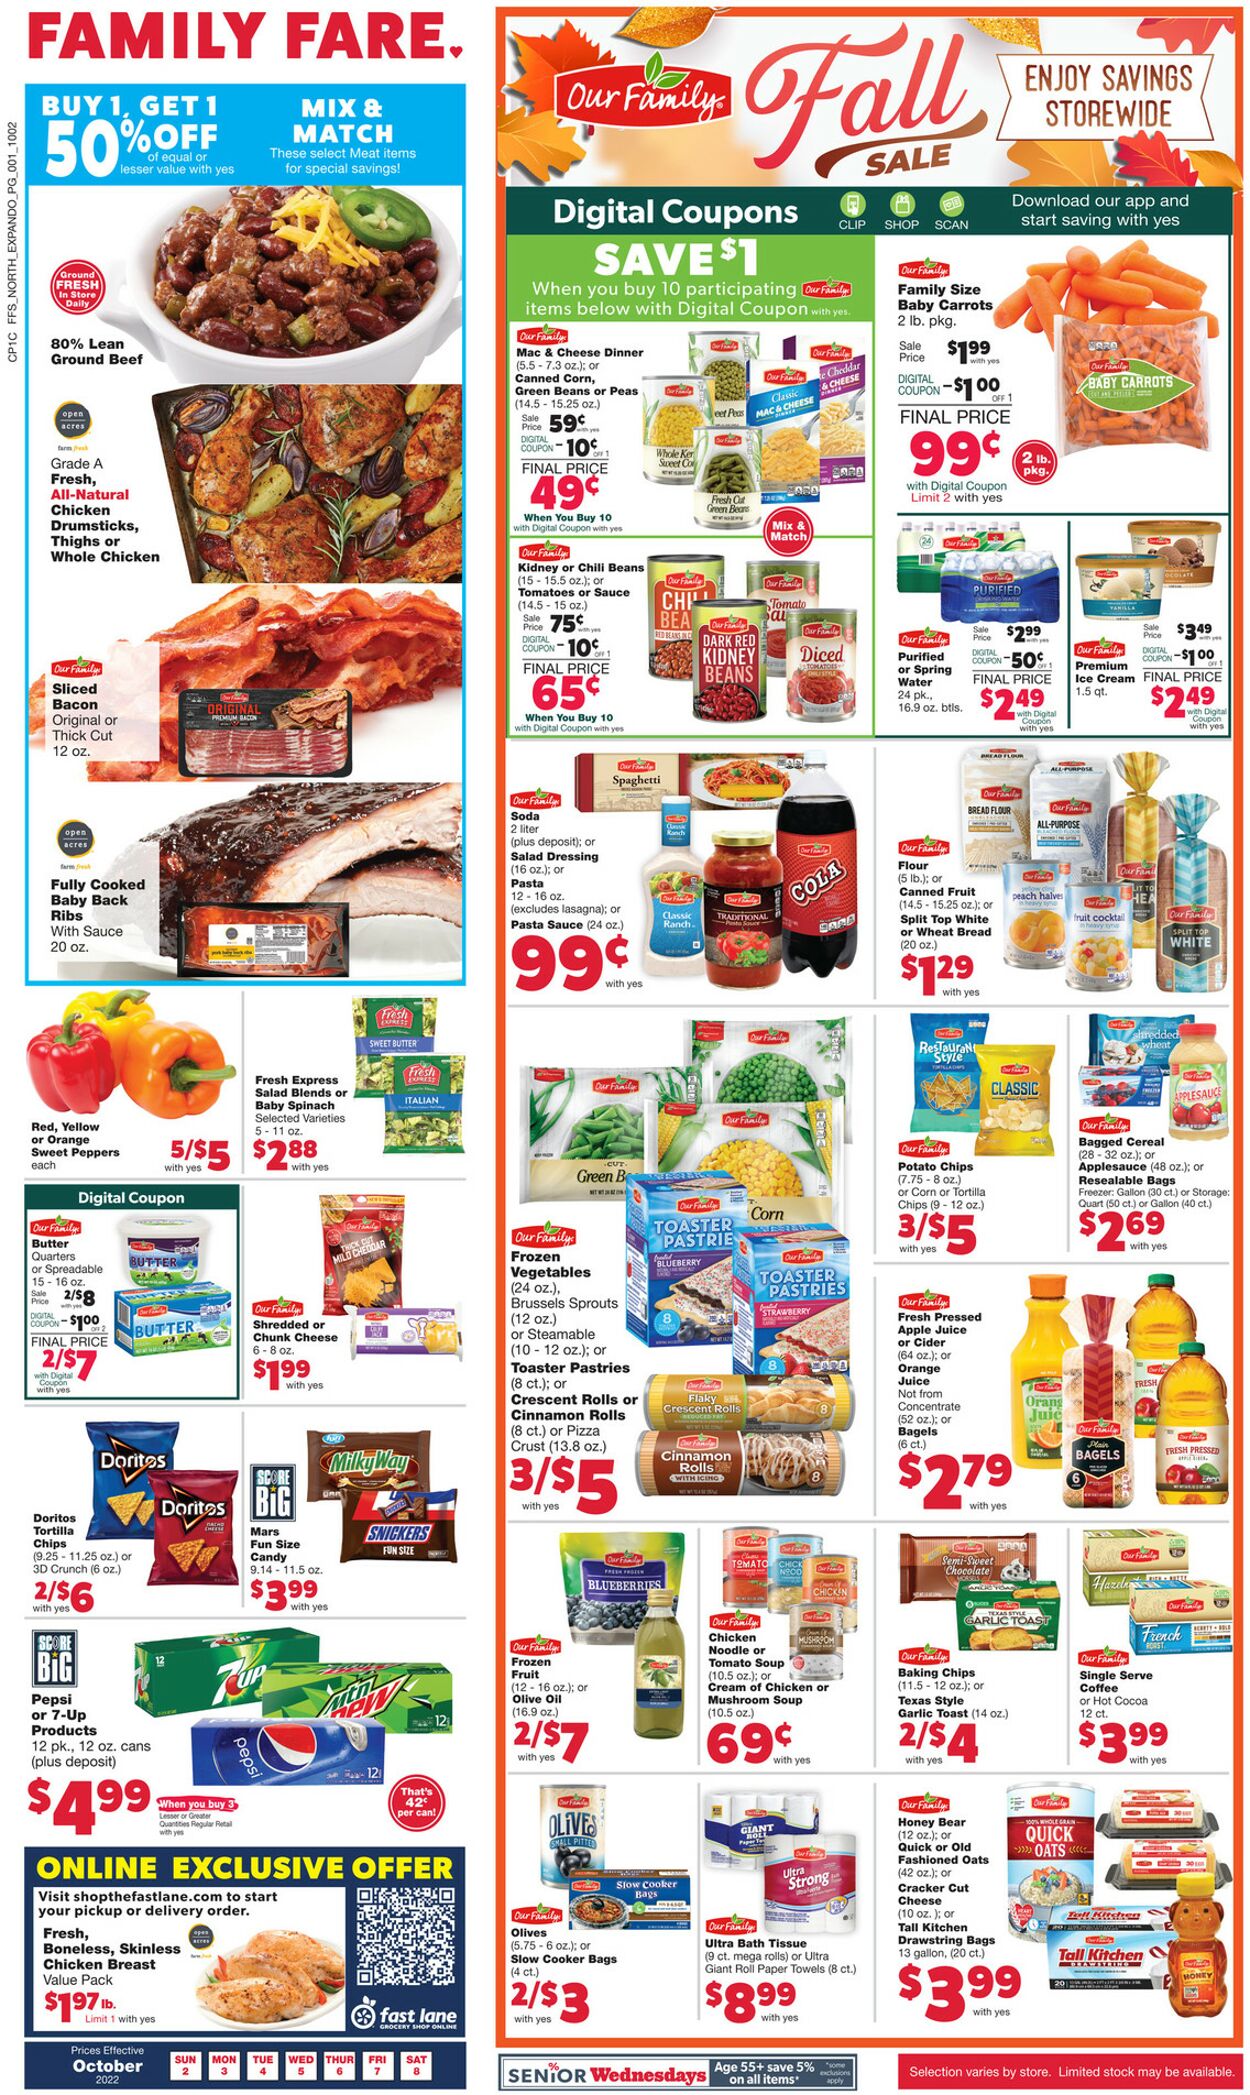 Family Fare Promotional weekly ads